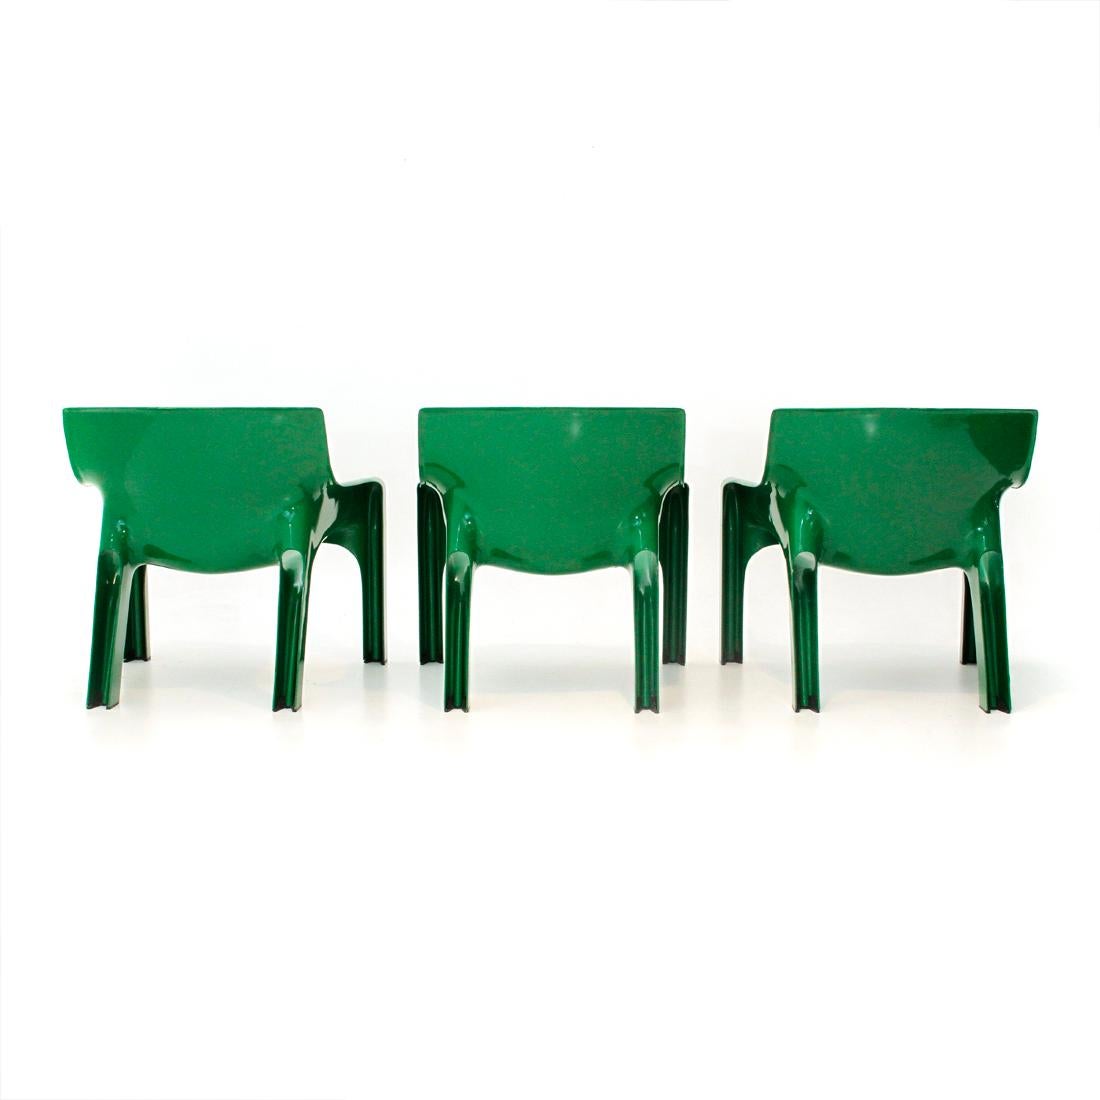 Late 20th Century Green Vicario Armchairs by Vico Magistretti for Artemide, 1970s